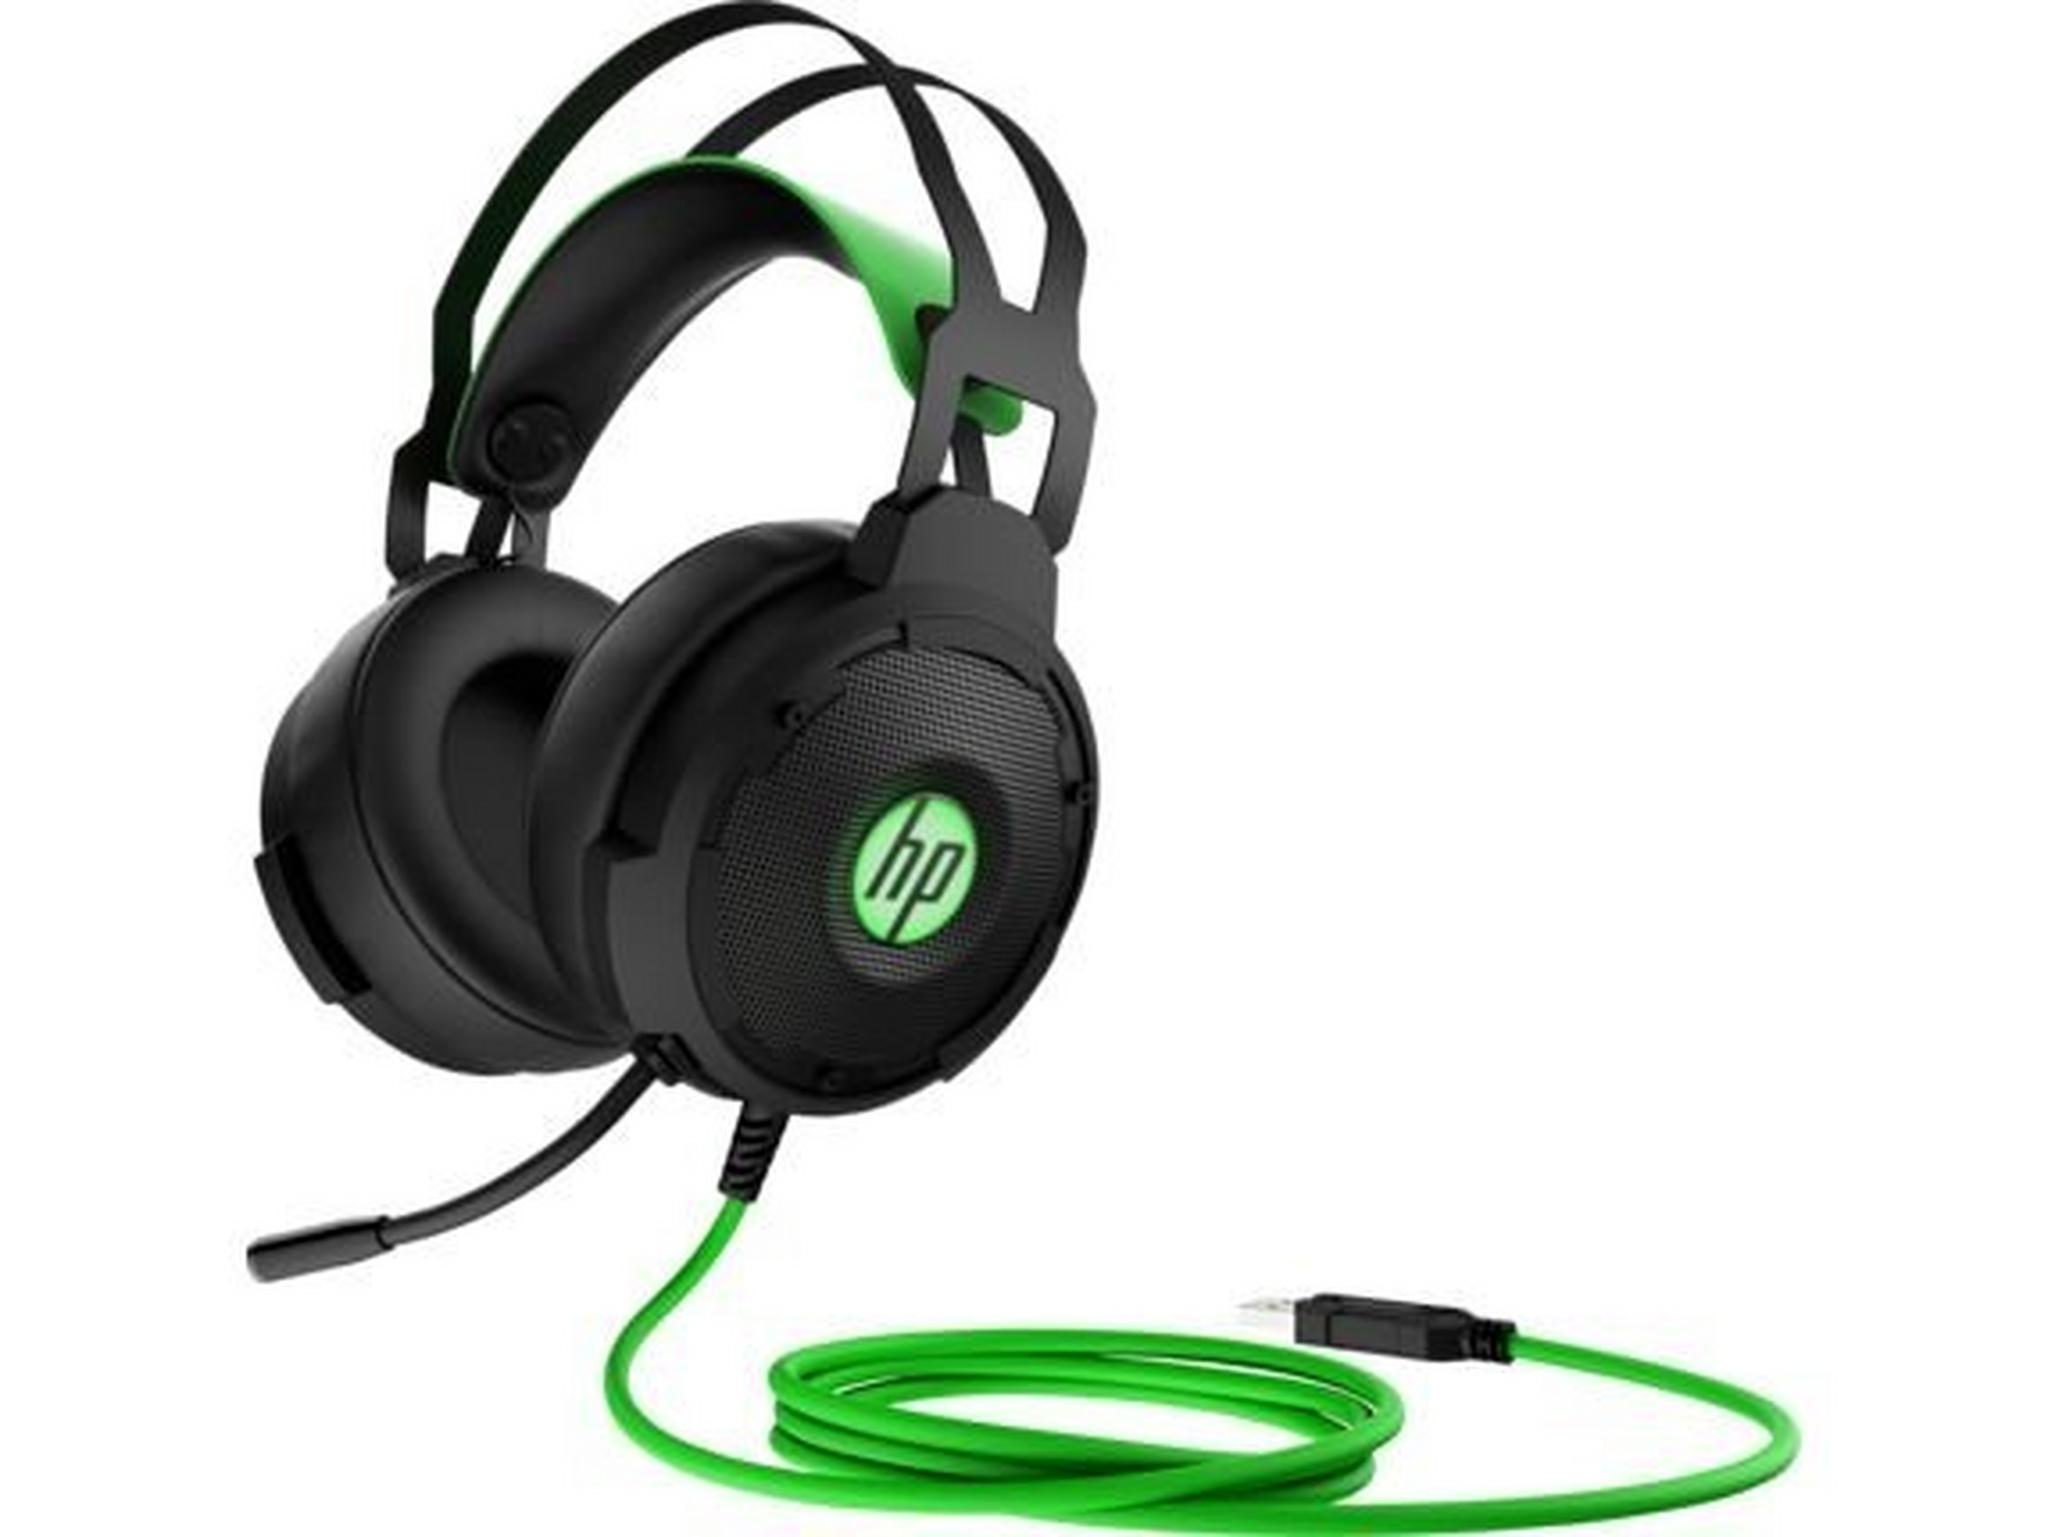 HP Pavilion Wired Gaming Headset 600 - Black/Green